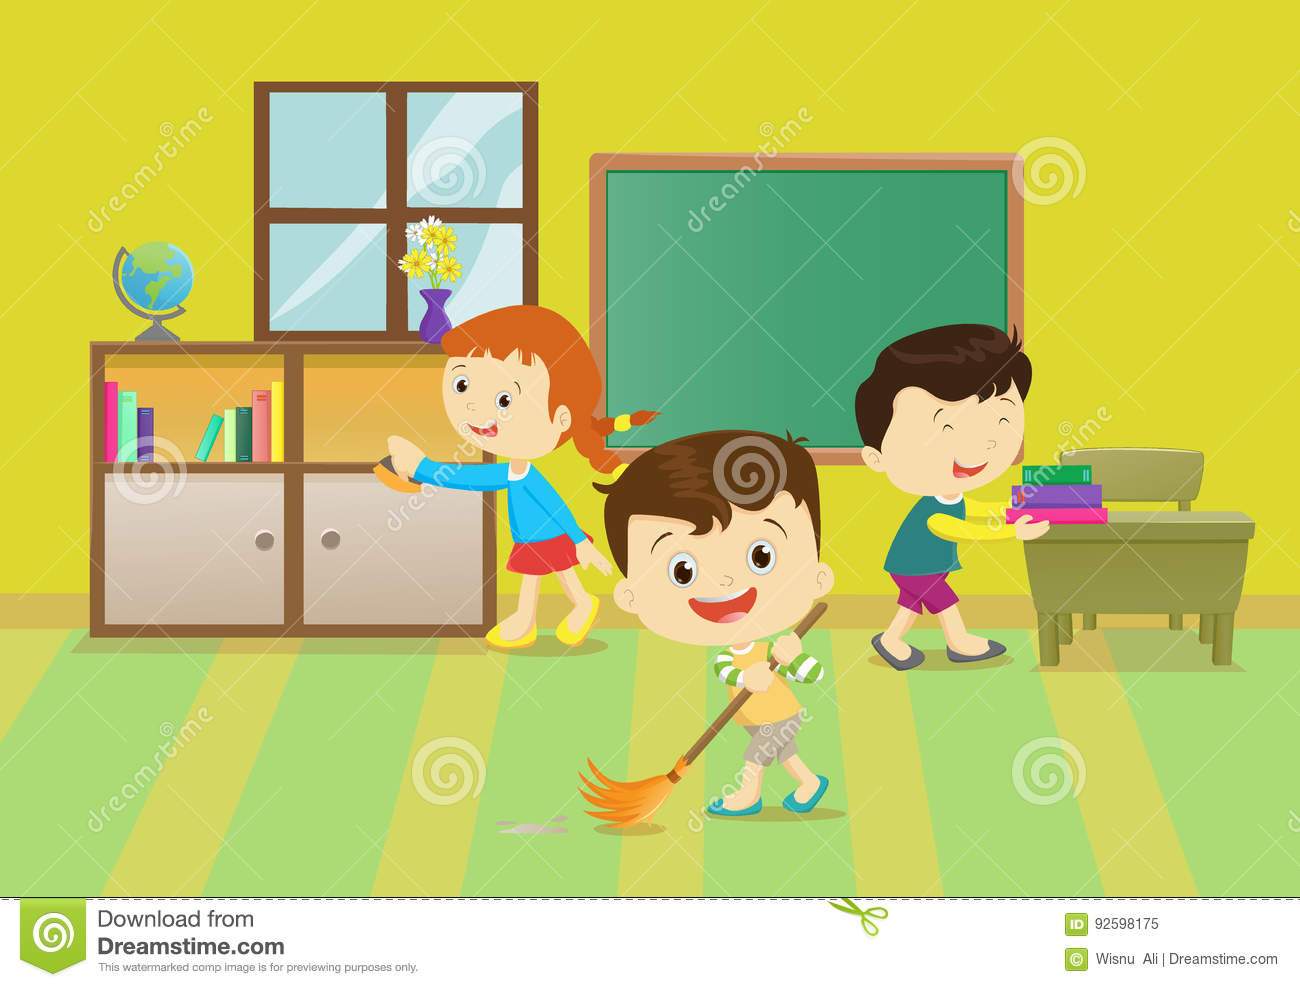 Children cleaning the classroom clipart